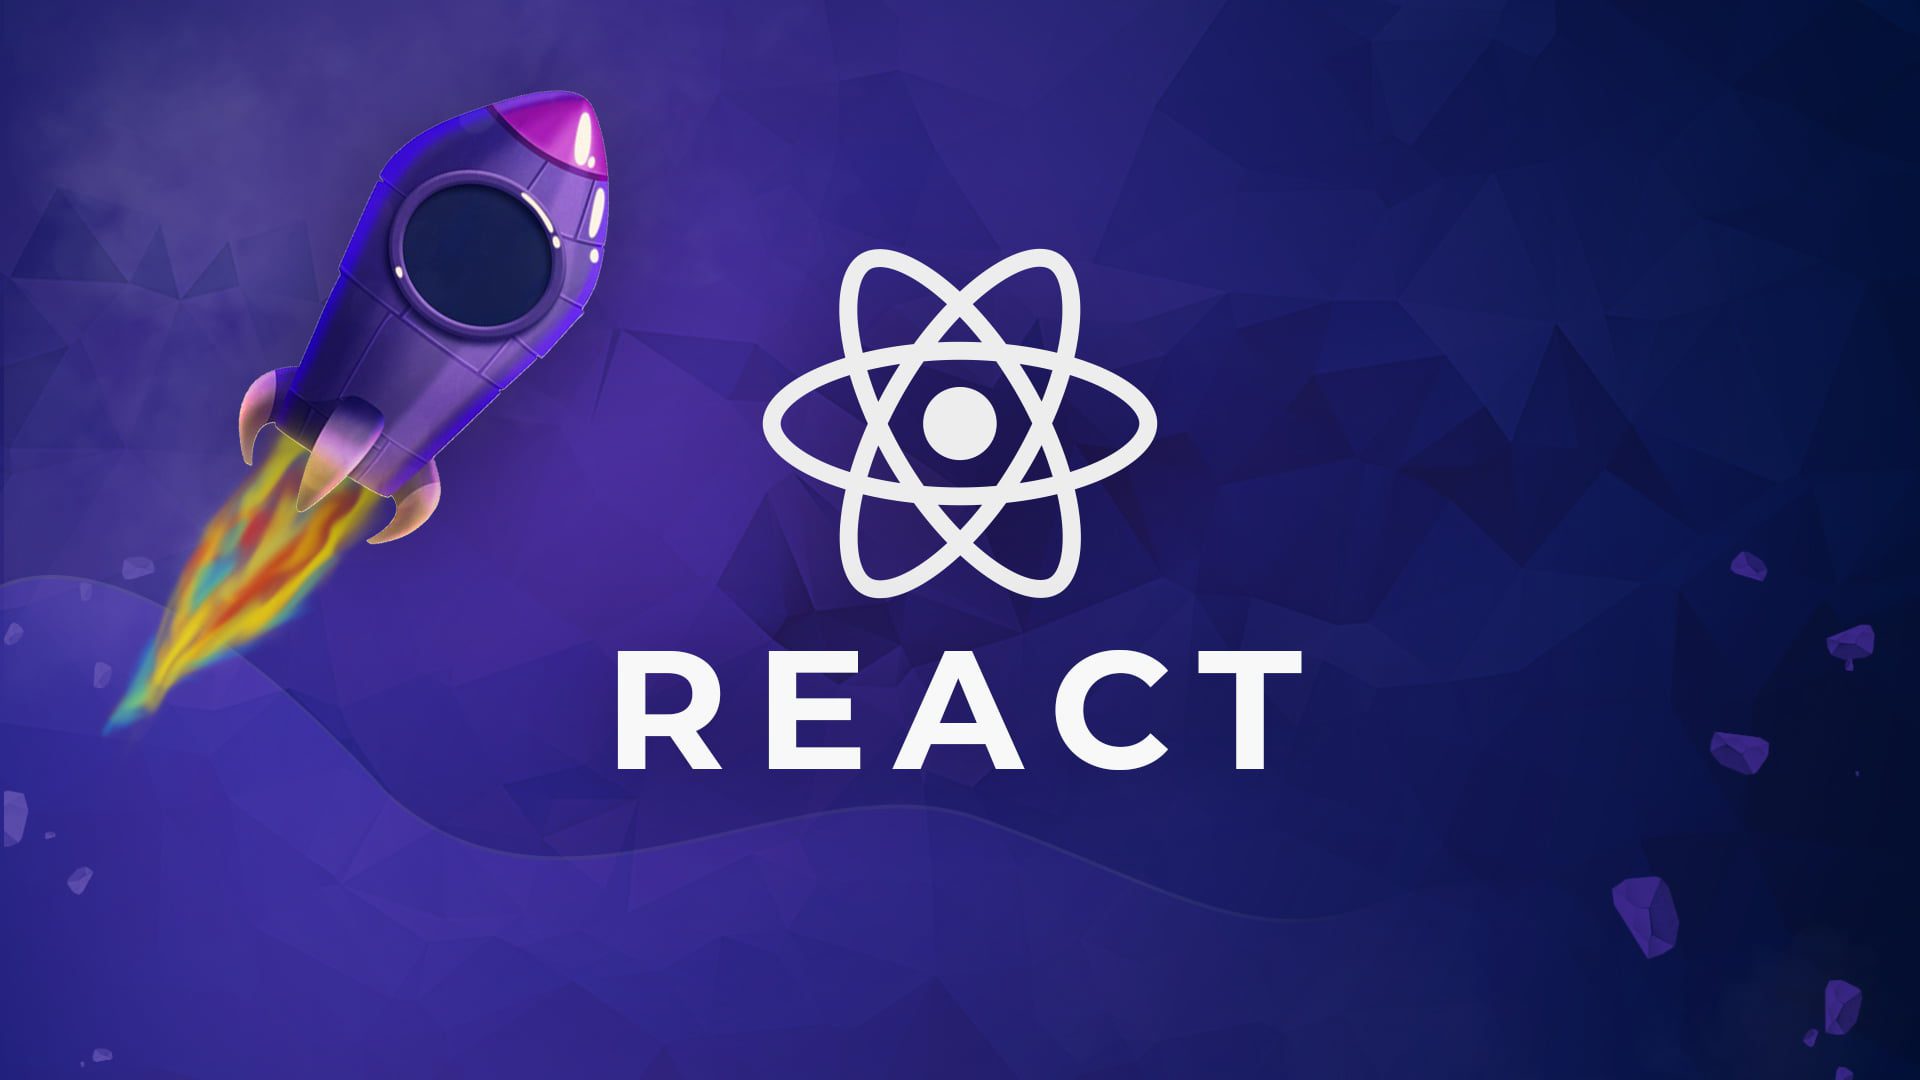 Code With Mosh] Mastering React | Code with Mosh Free Courses Online Free Download Torrent | FreeCoursesOnline.Me